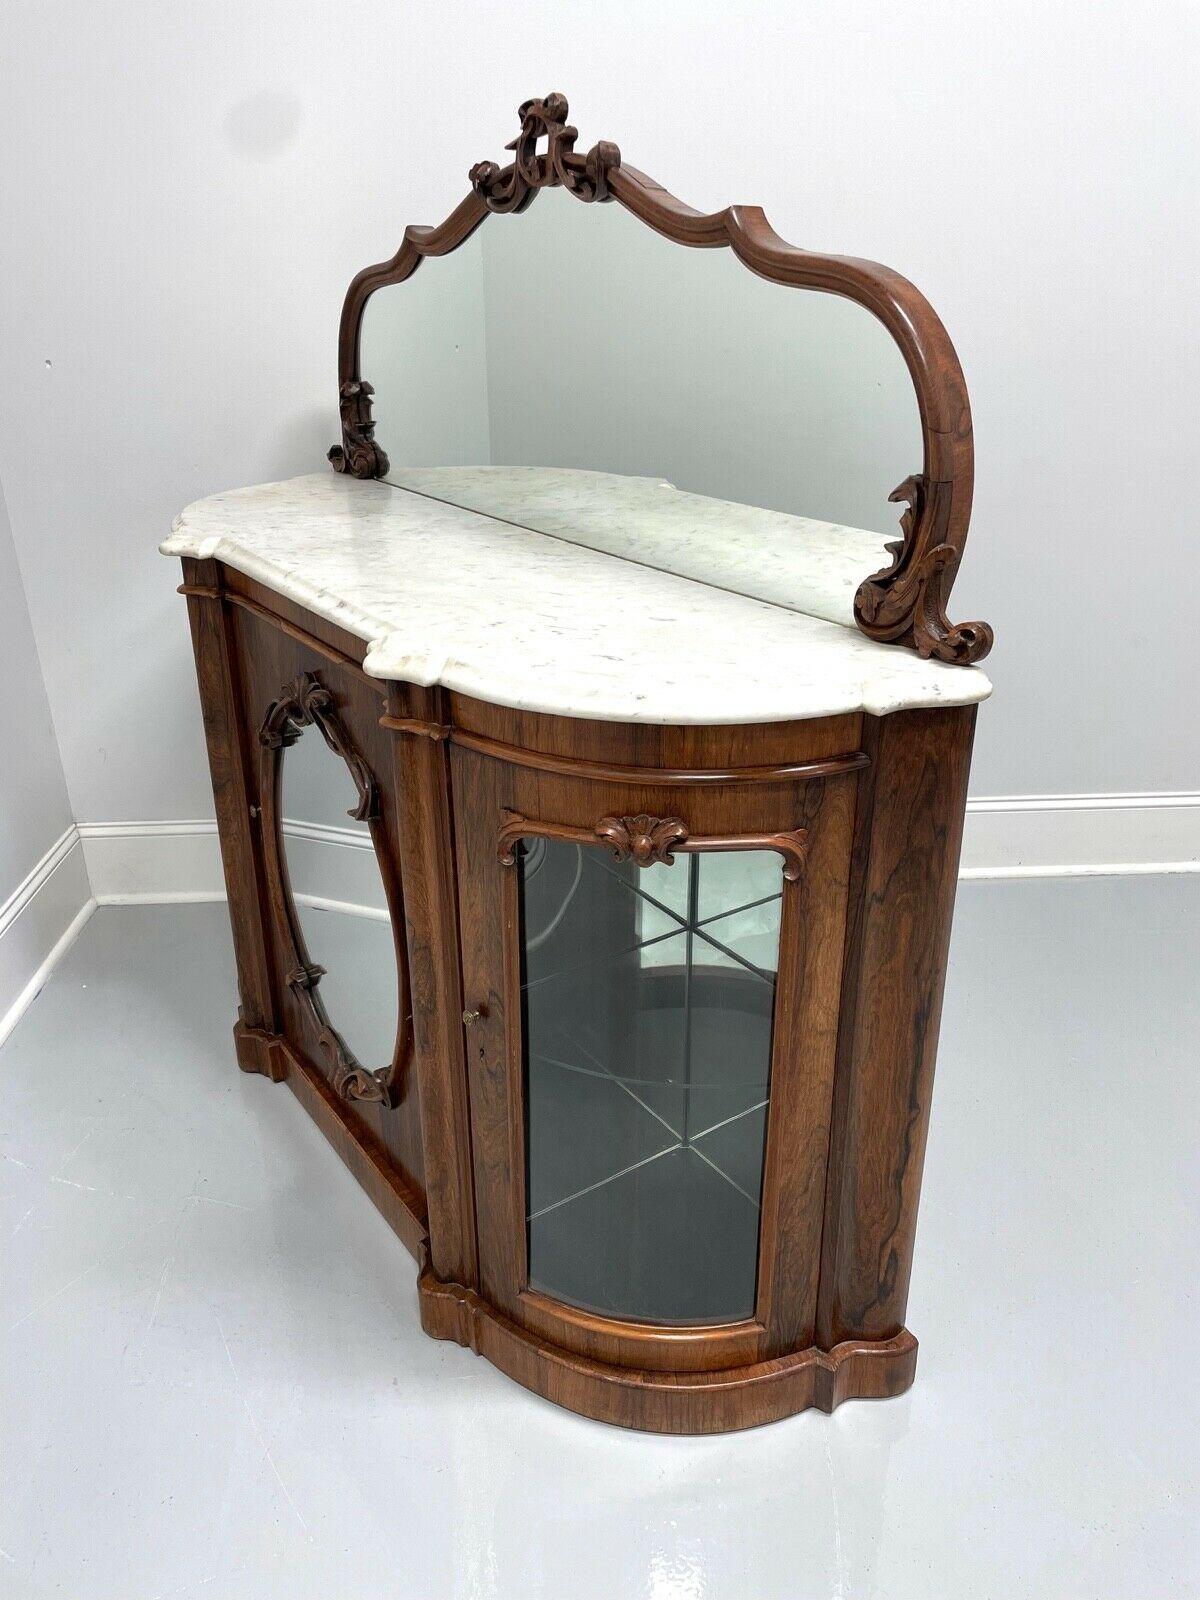 Antique Circa 1850 Victorian Rococo Revival Rosewood Marble Top Credenza In Good Condition For Sale In Charlotte, NC